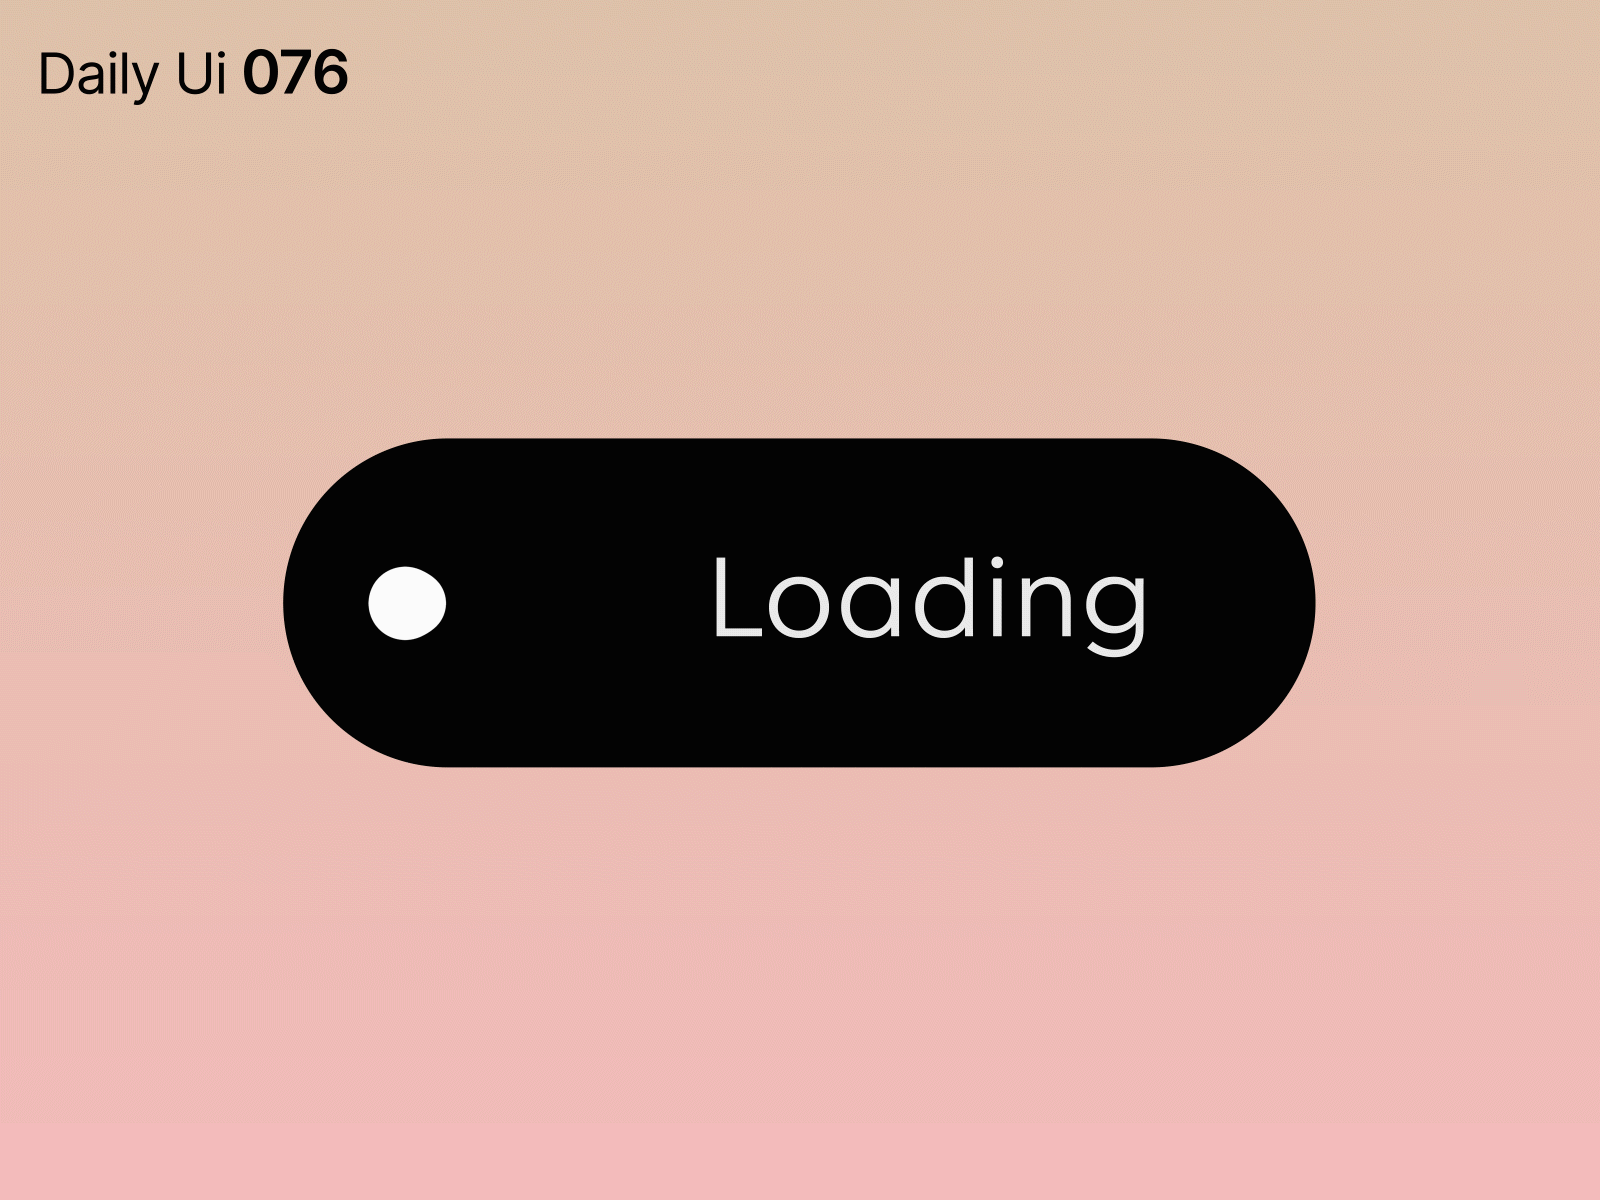 Daily Ui 076 - Loading animation daily 100 challenge daily ui daily ui 076 dailyui design liquid liquid motion loading loading animation loading icon ui ui design uidesign ux